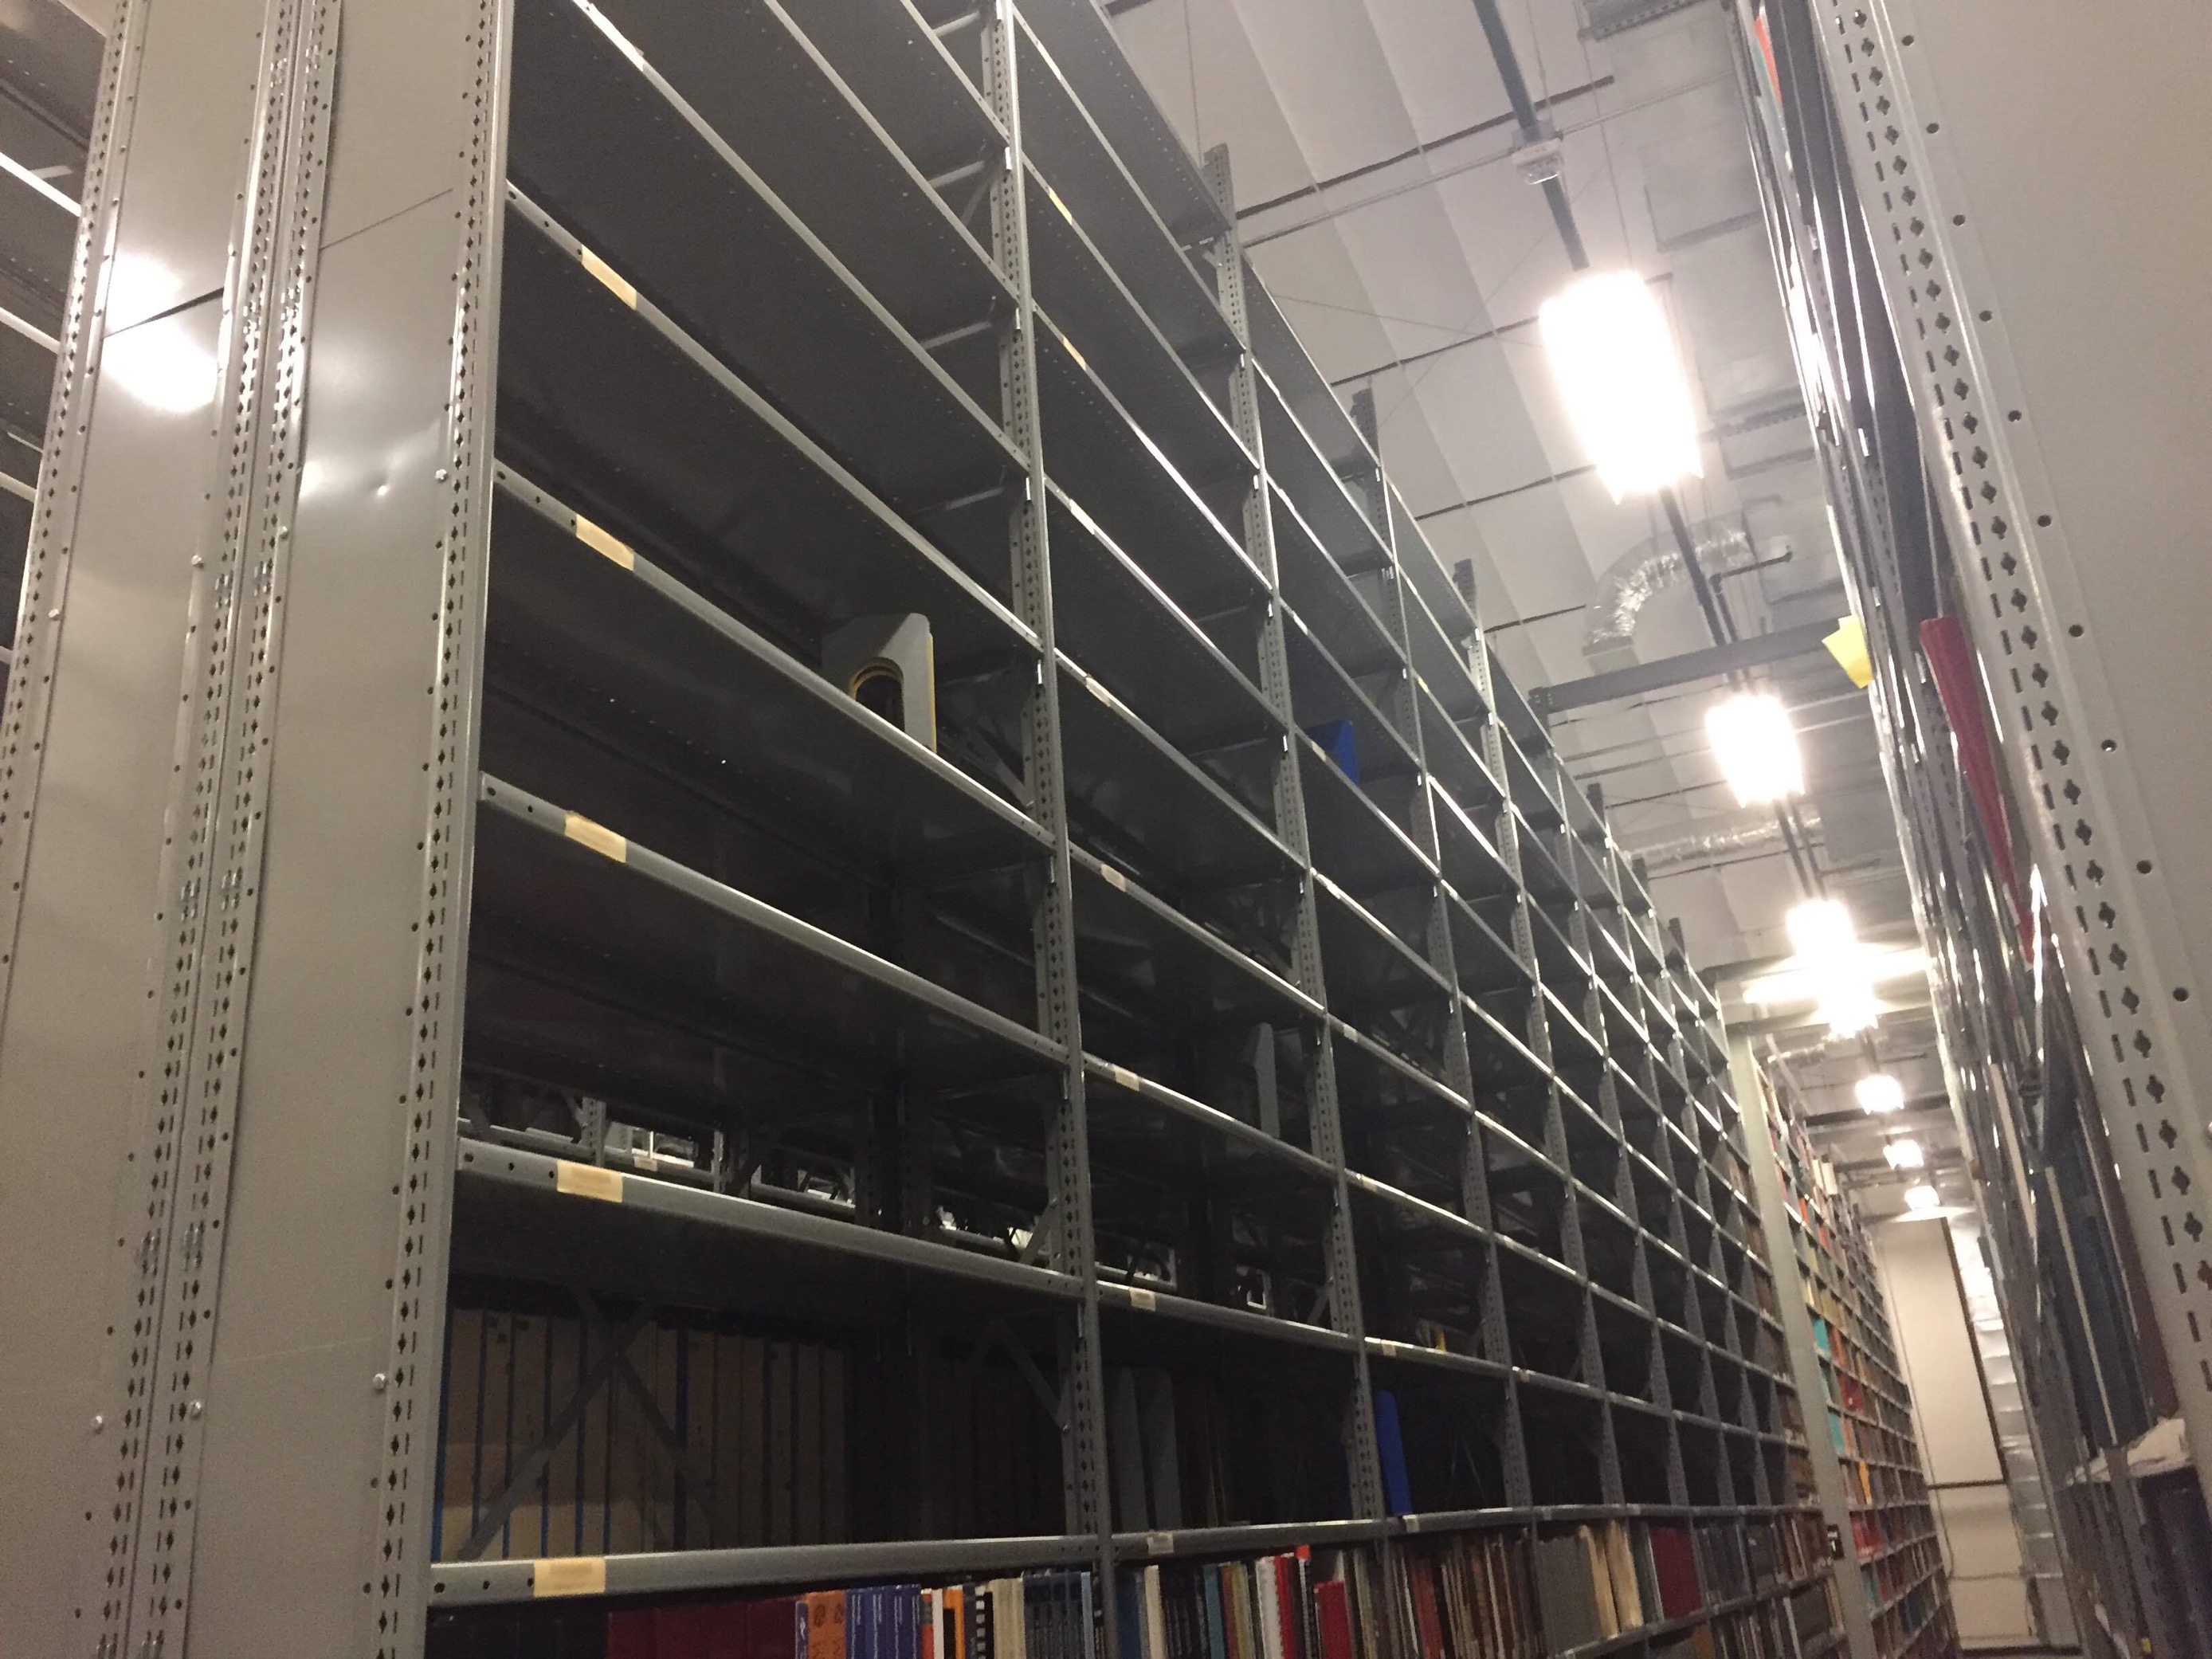 half empty shelves in the library collections depository